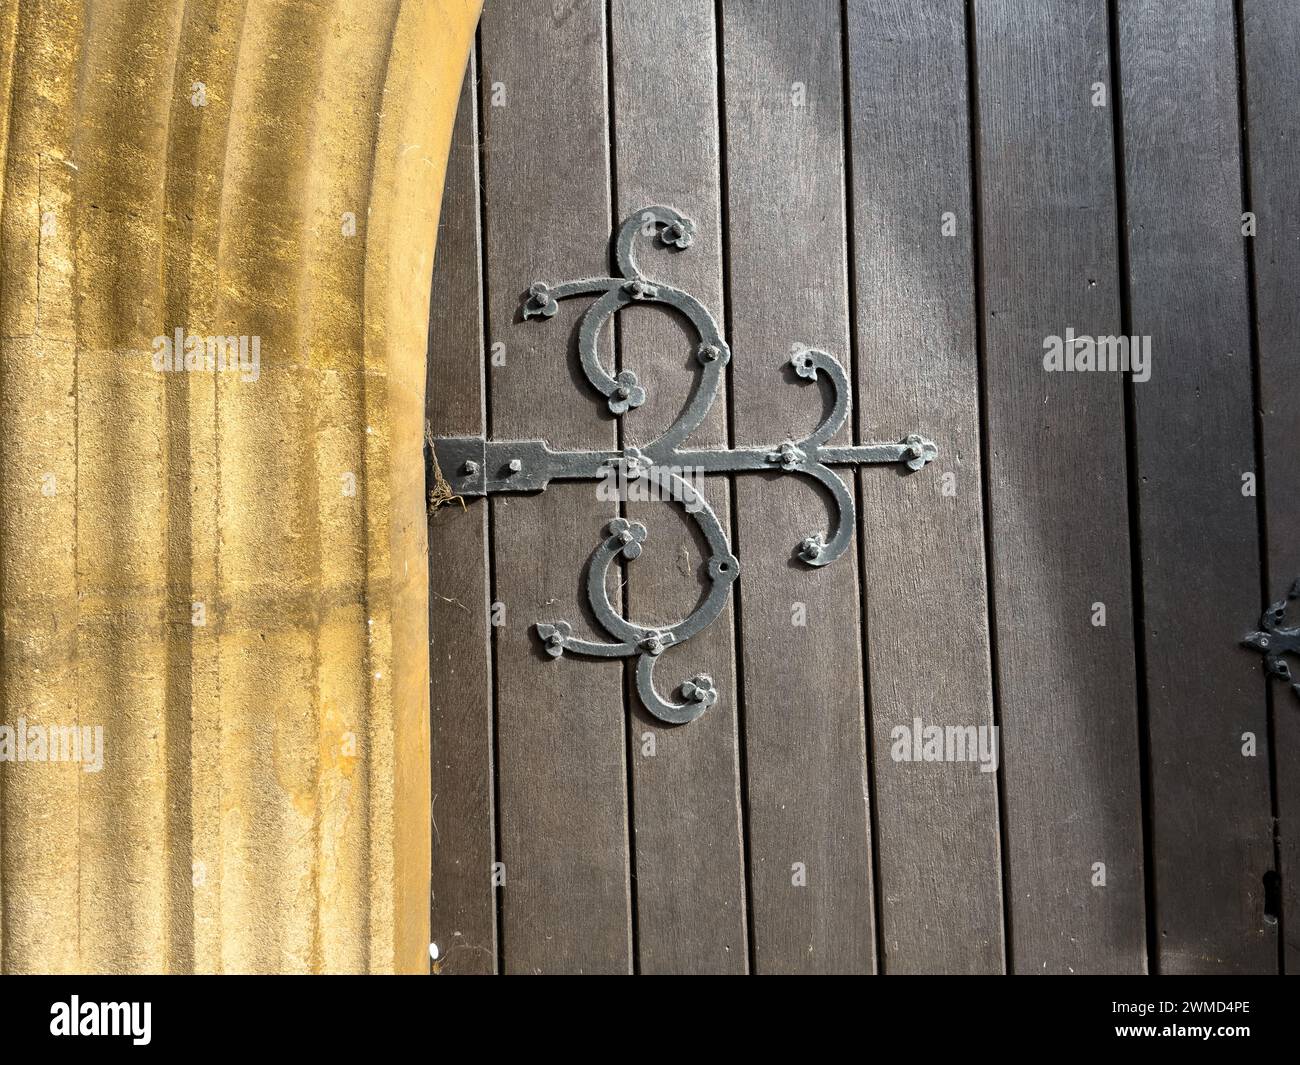 The image presents a close-up view of the wooden door of St. Mary's Church in Thatcham, Berkshire, adorned with decorative metal hardware. Constructed Stock Photo